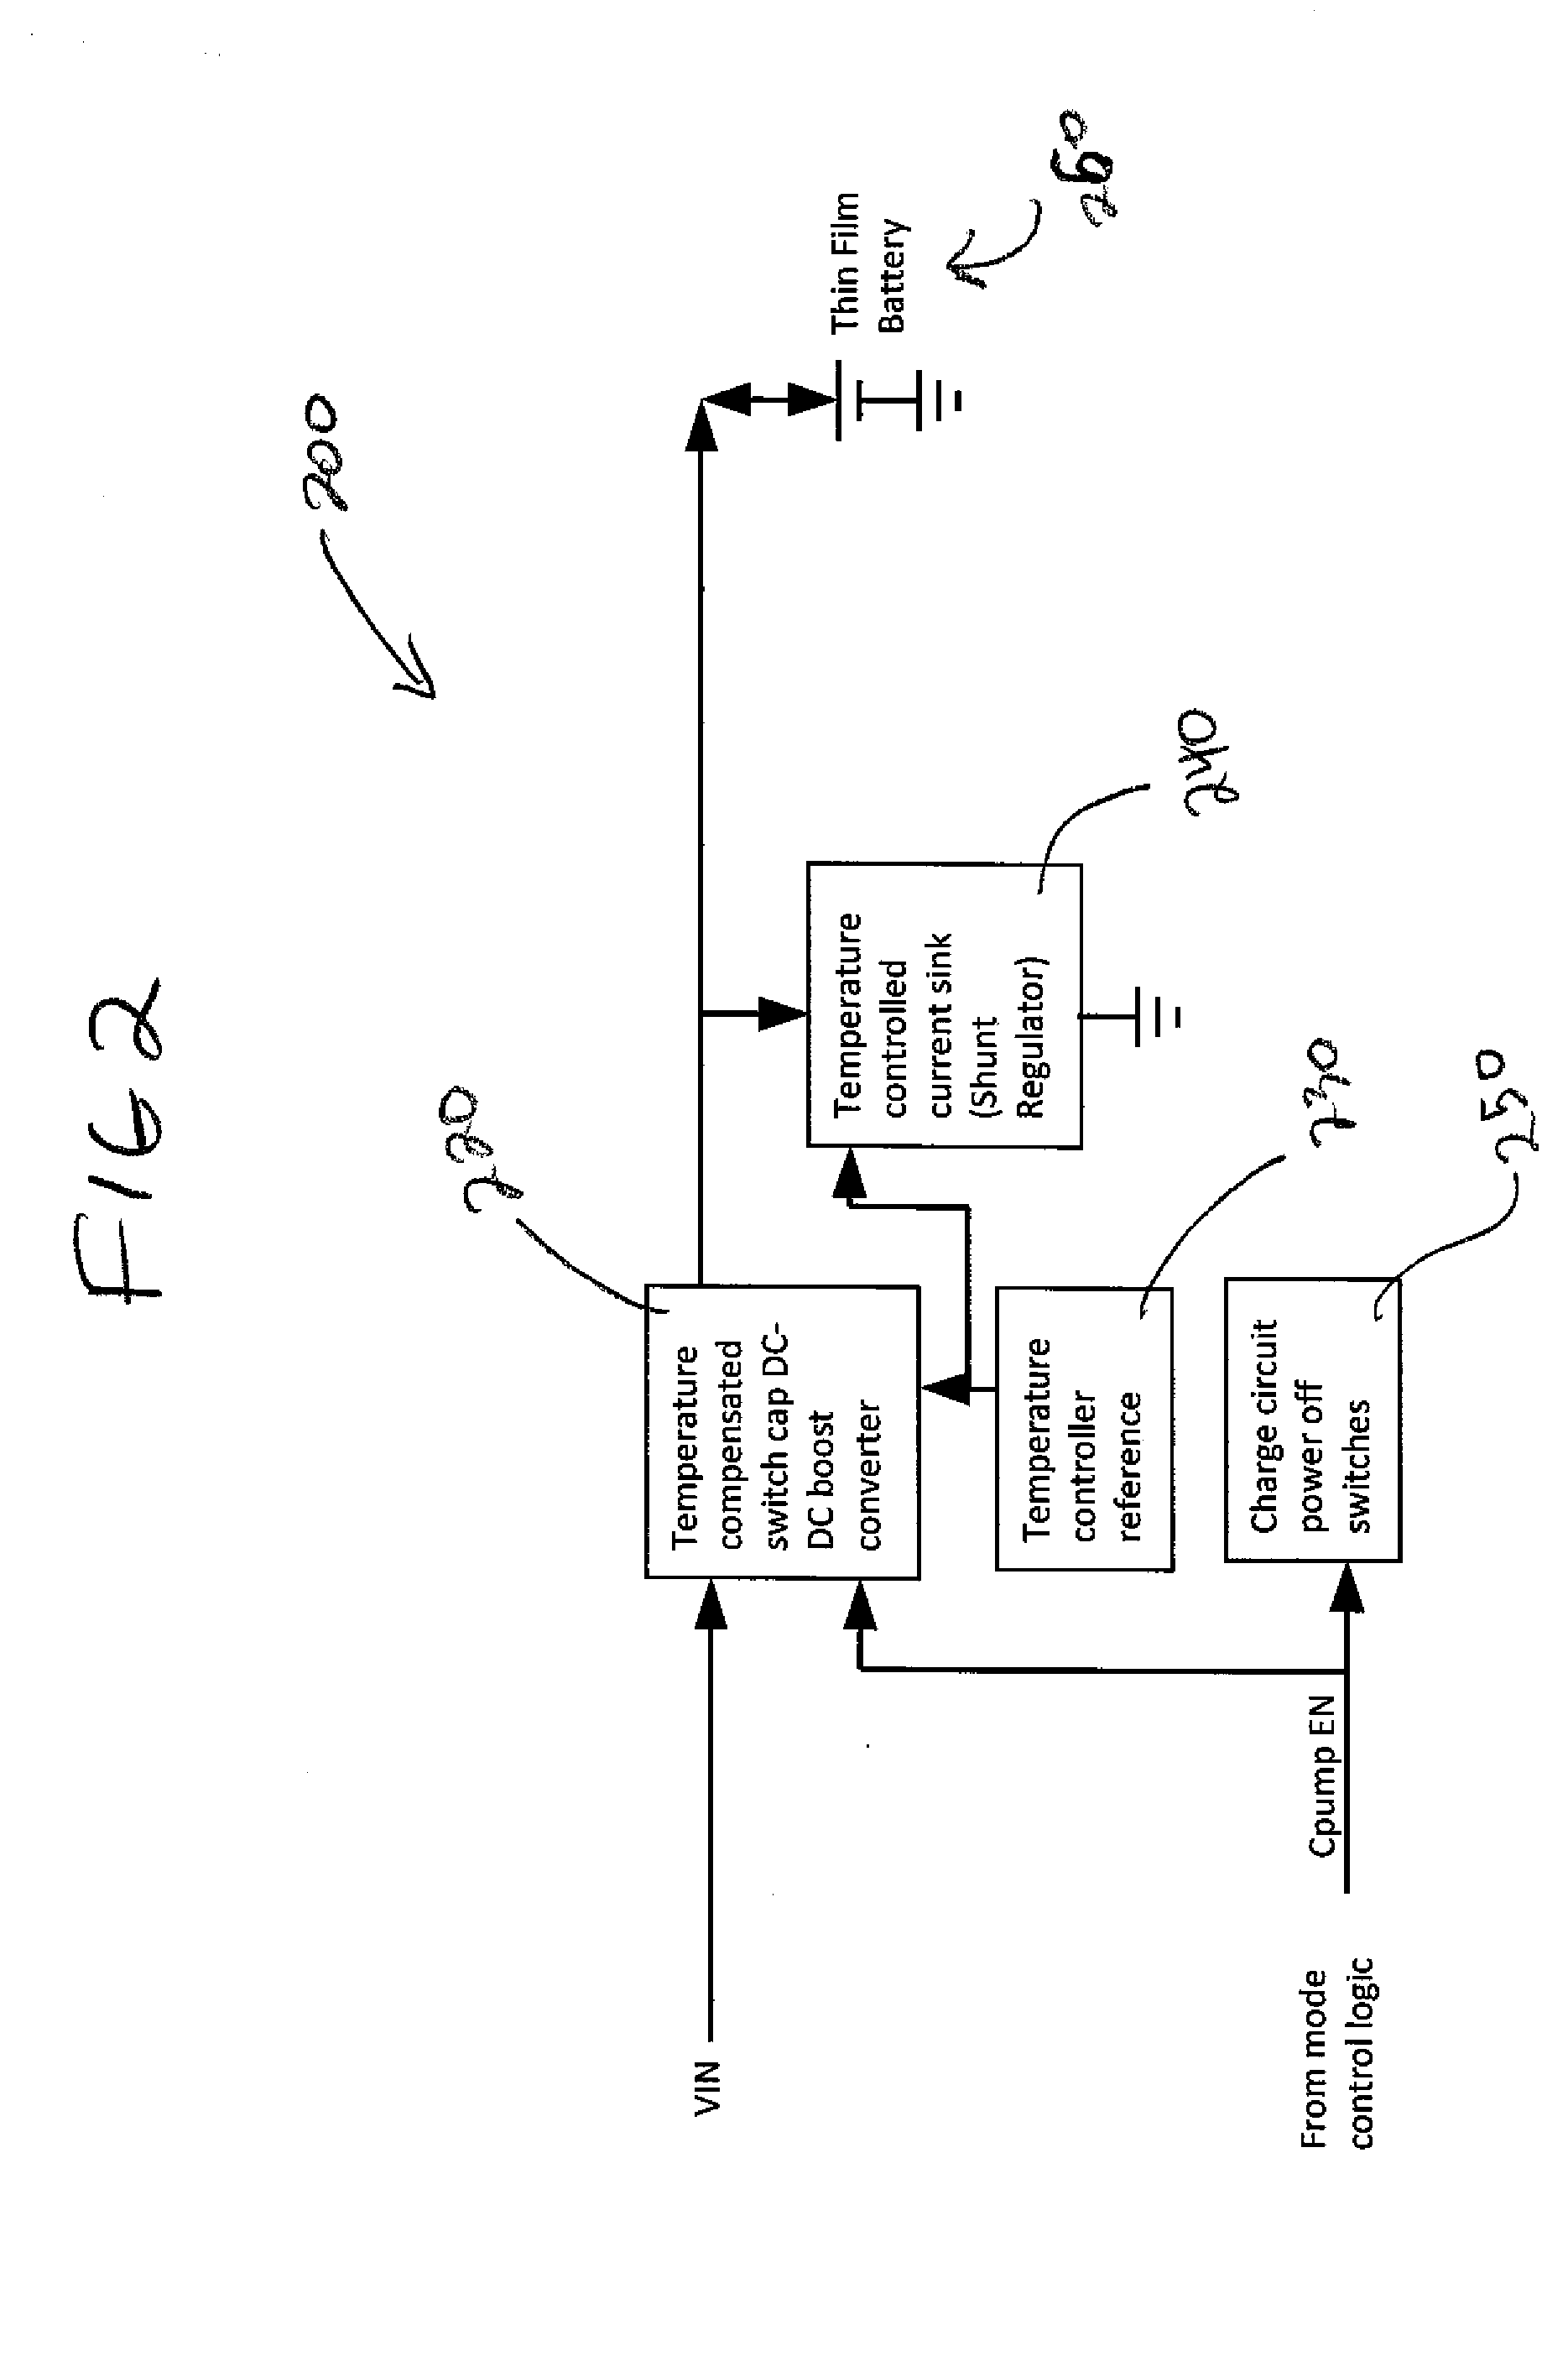 Thin film microbattery charge and output control